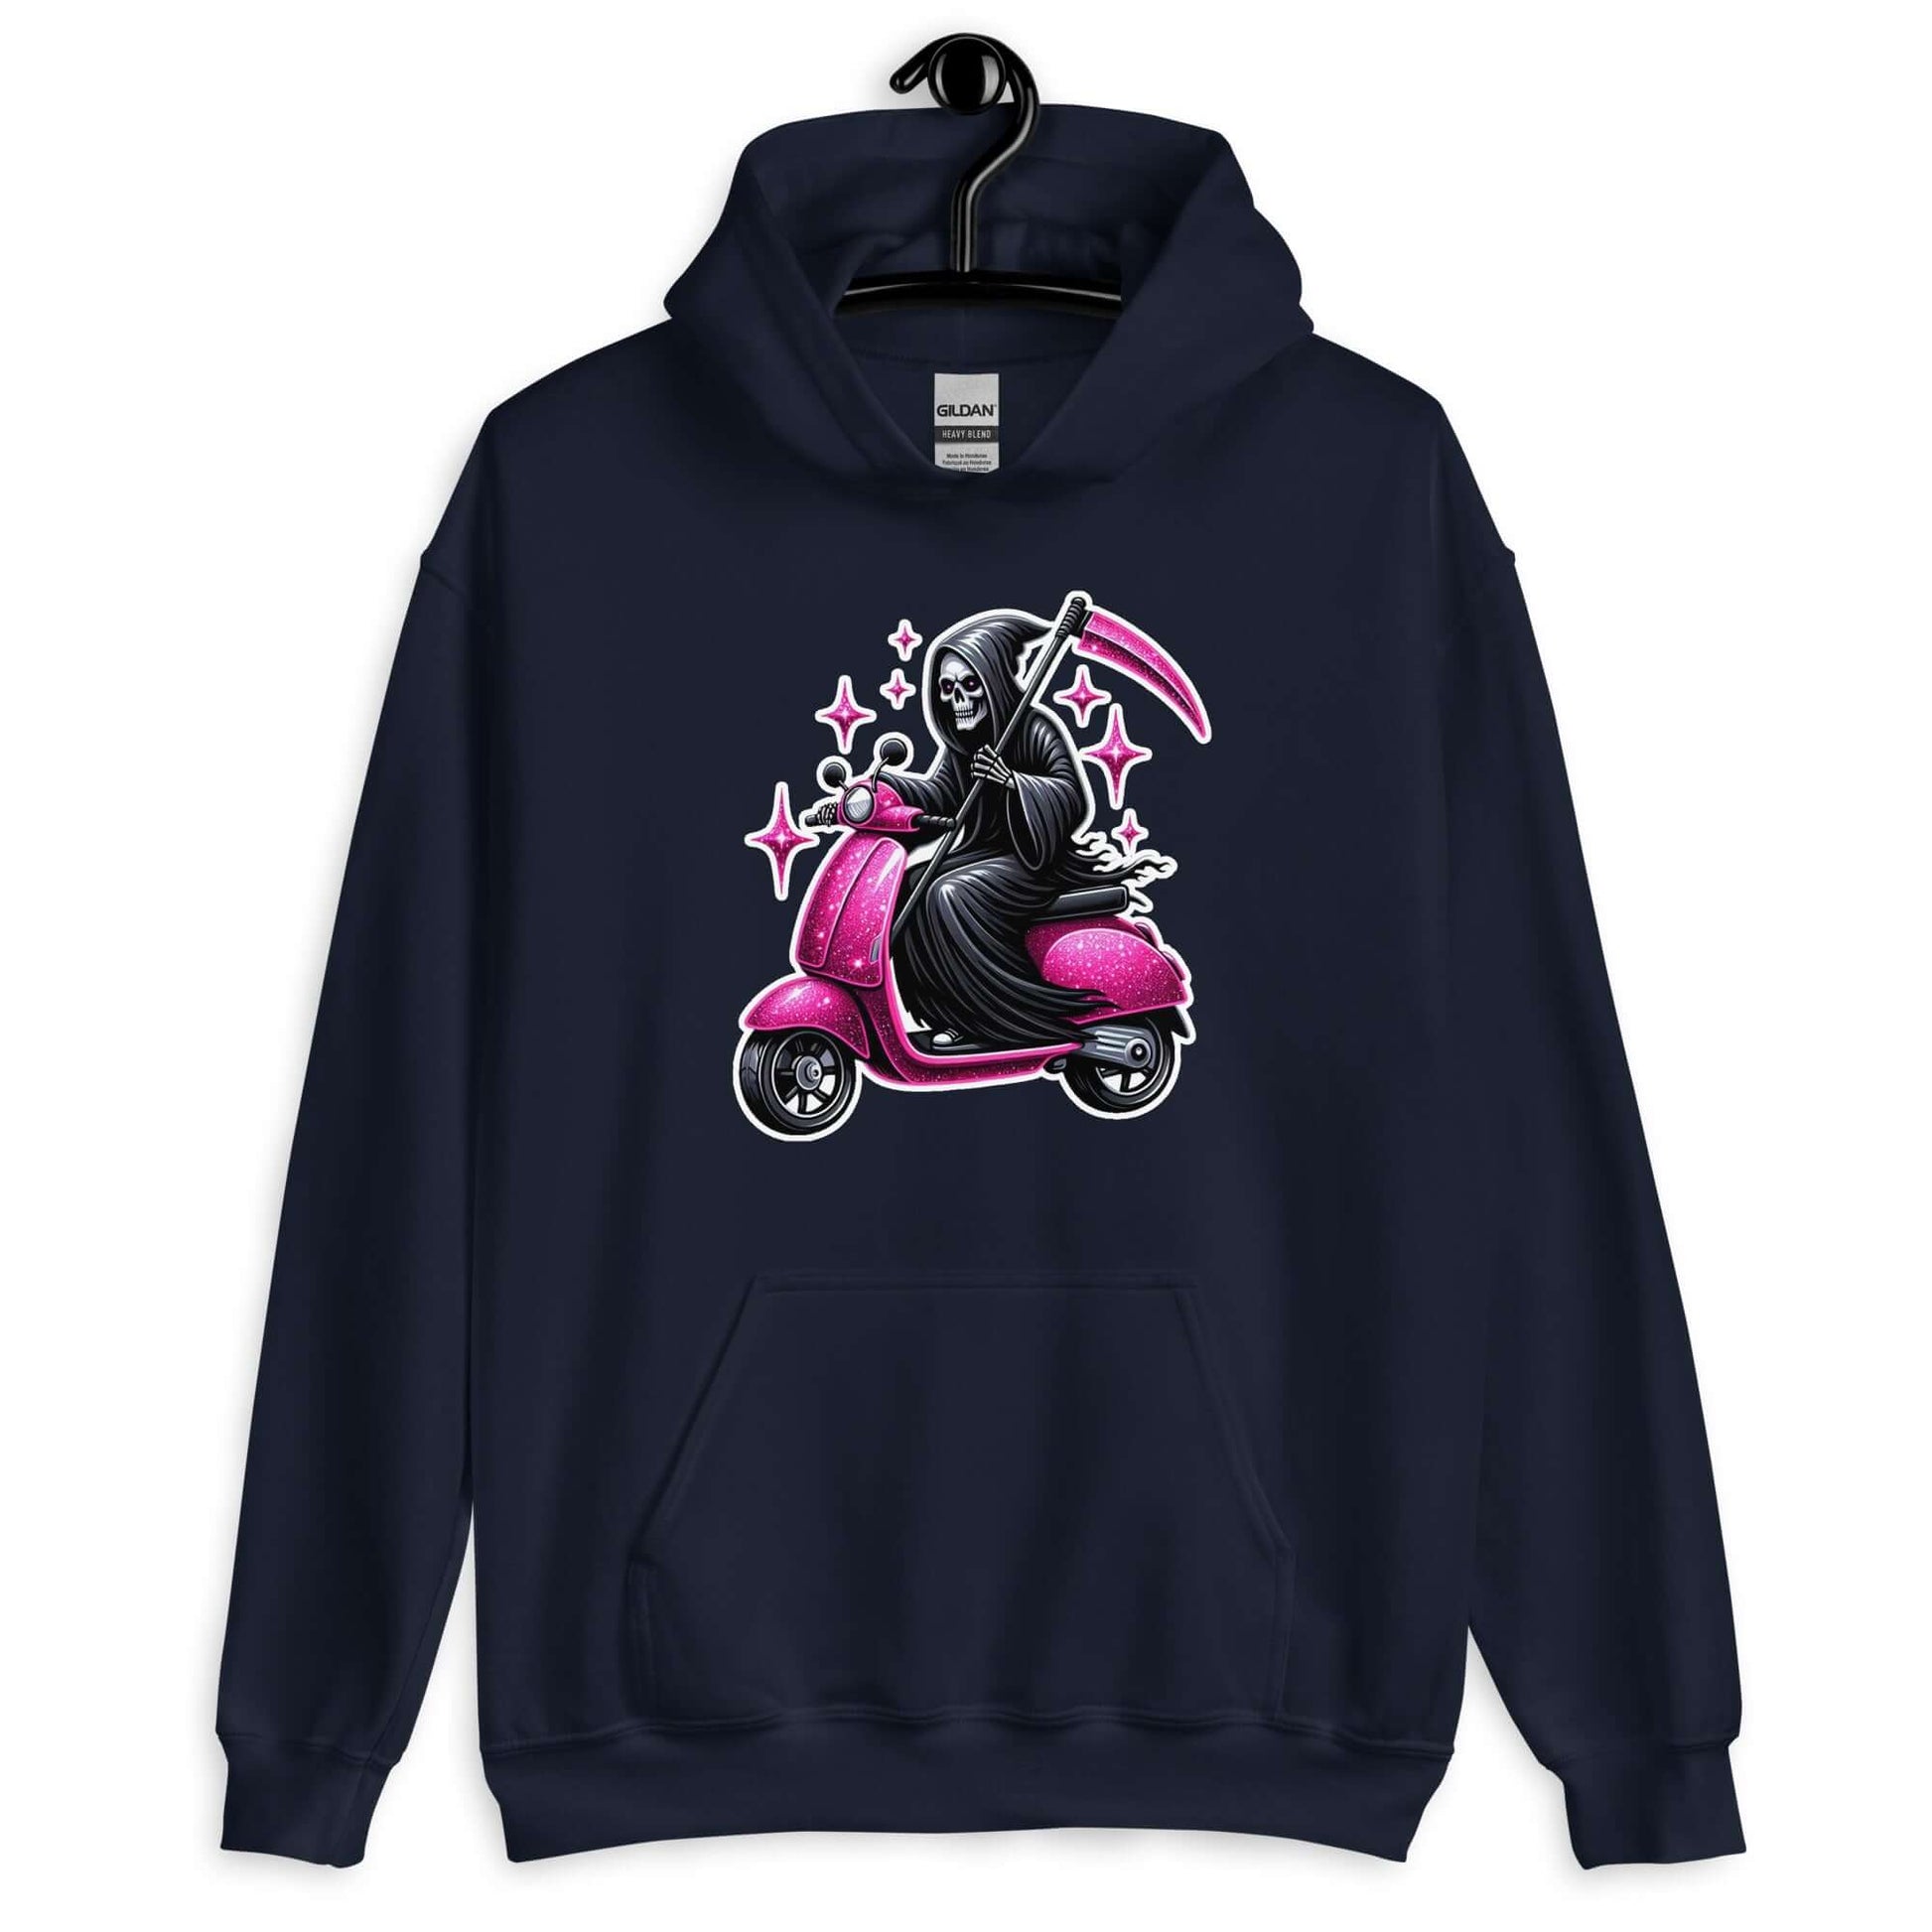 Navy blue hoodie sweatshirt with funny image of the Grim Reaper riding on a glam pink scooter printed on the front.